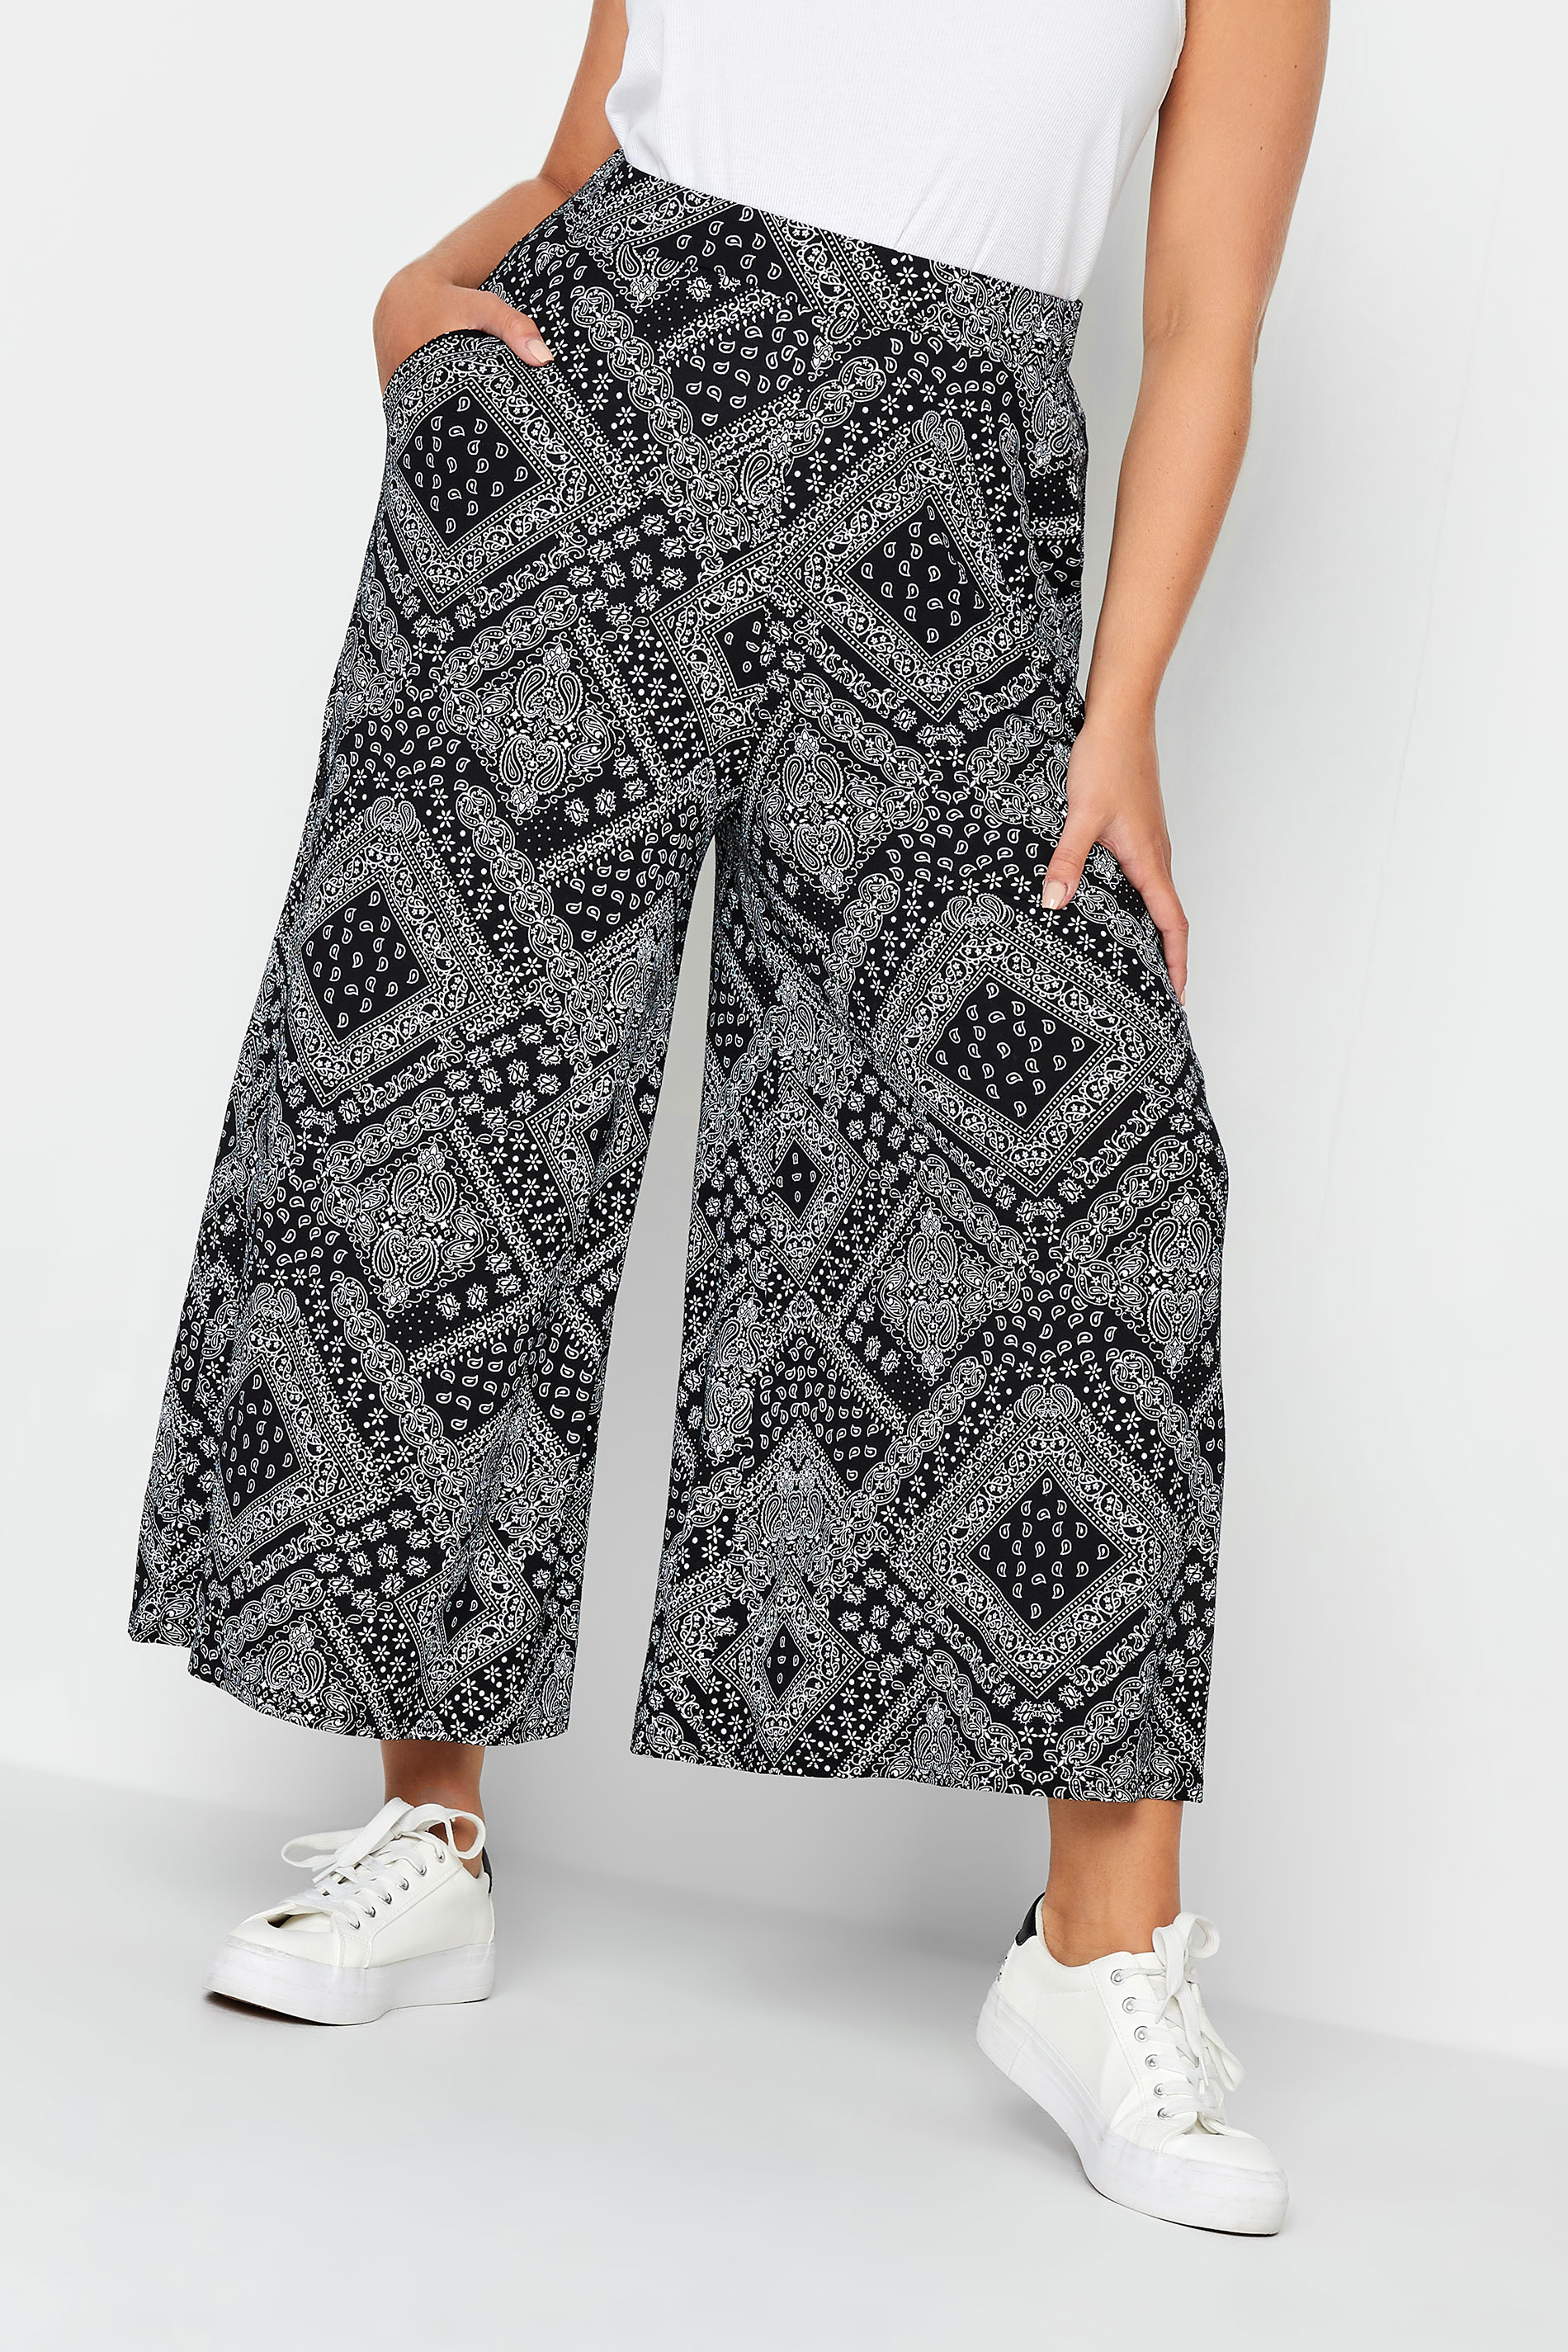 YOURS Curve Plus Size Black Paisley Print Midaxi Culottes | Yours Clothing  1